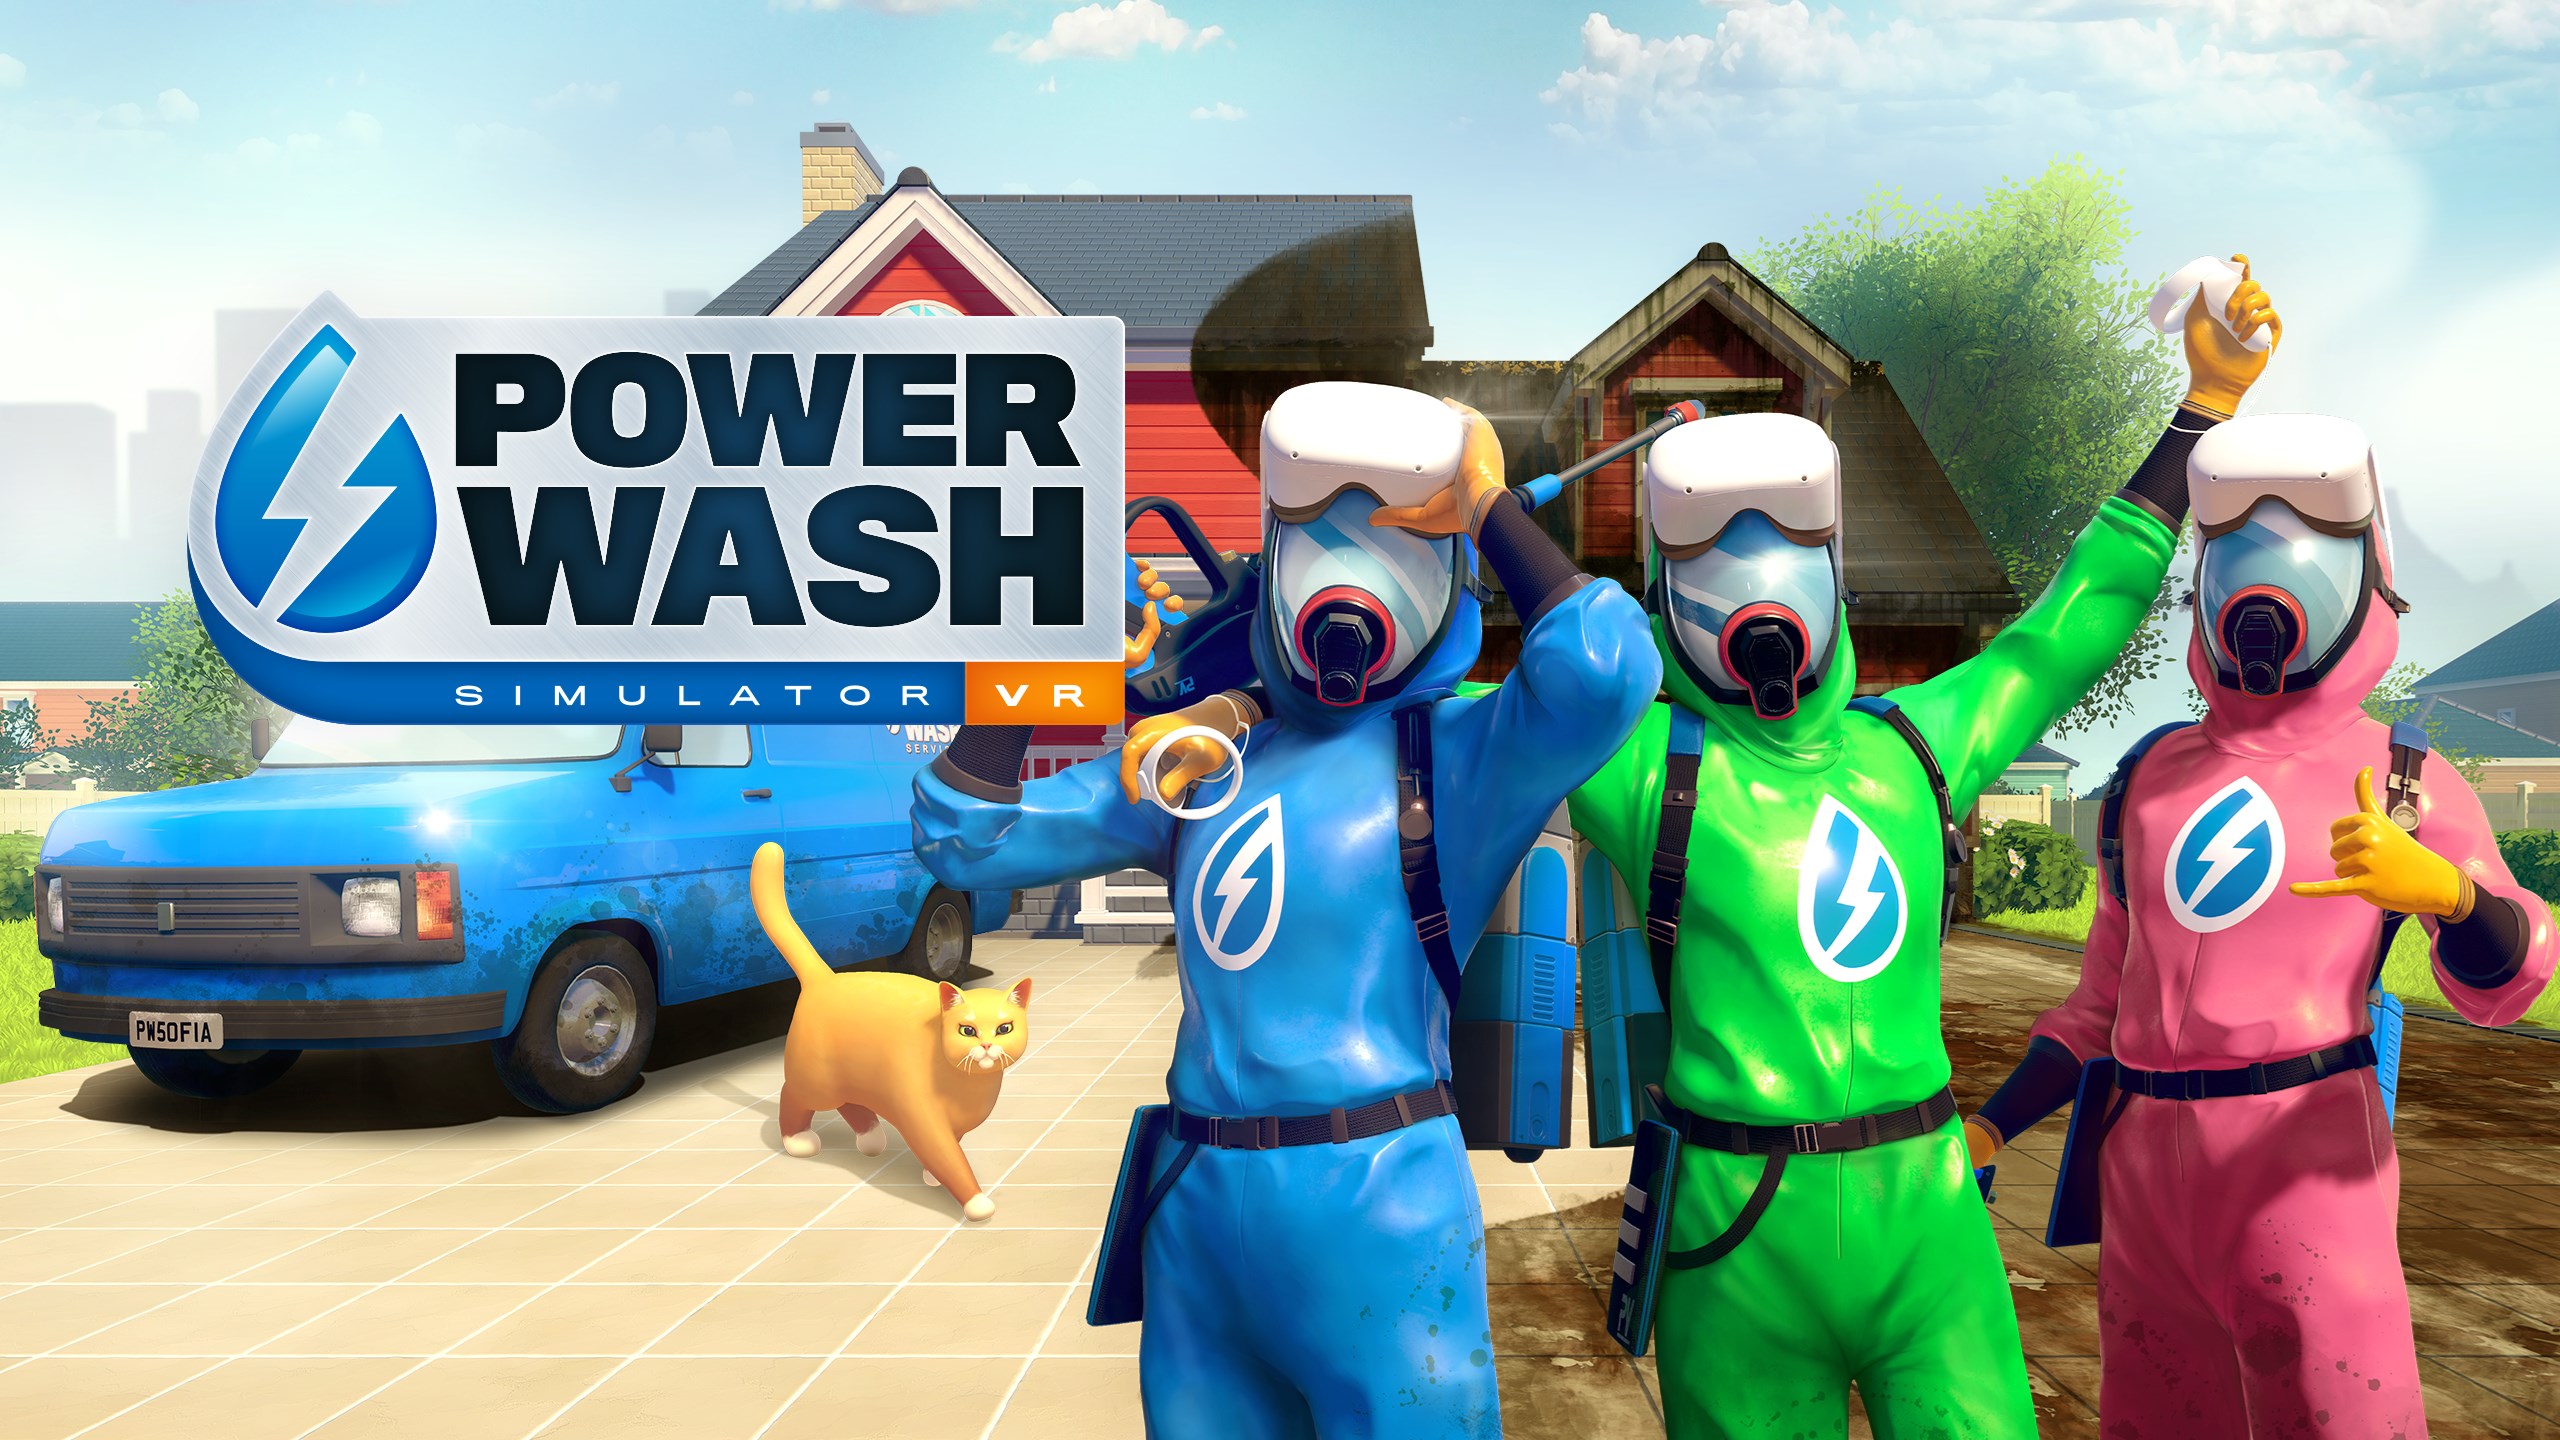 The key art for PowerWash Simulator VR. In the background is a red two-story house and a blue van. In the foreground are three people dressed head-to-toe in protective gear: one in blue, one in green, and one in pink.